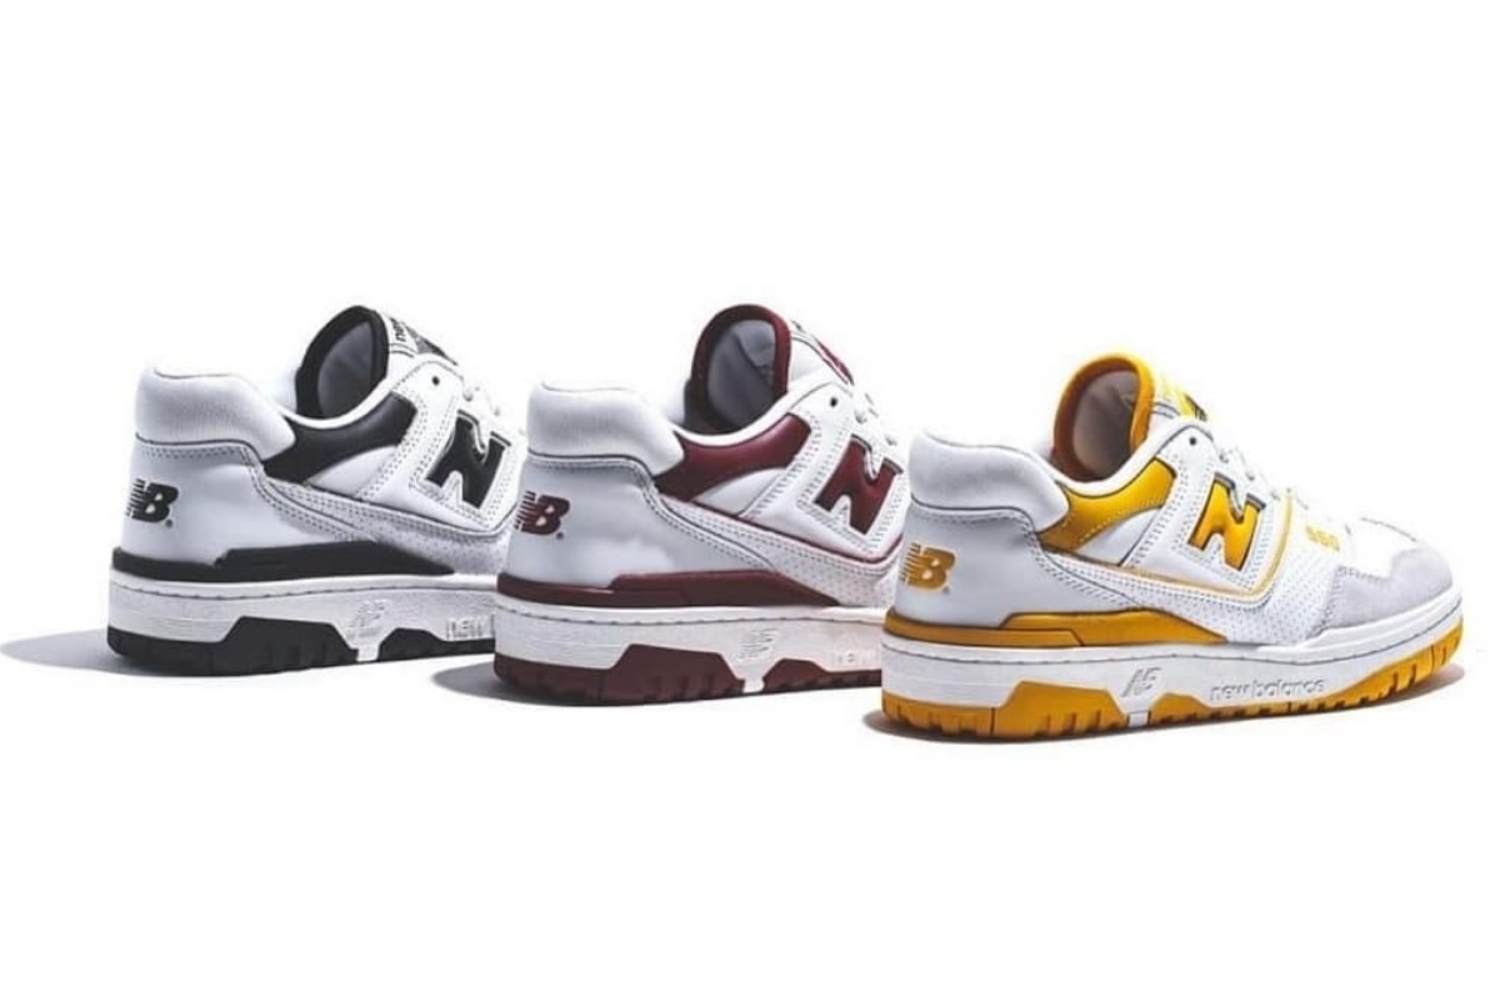 New Balance 550 - A tribute to the 90s look